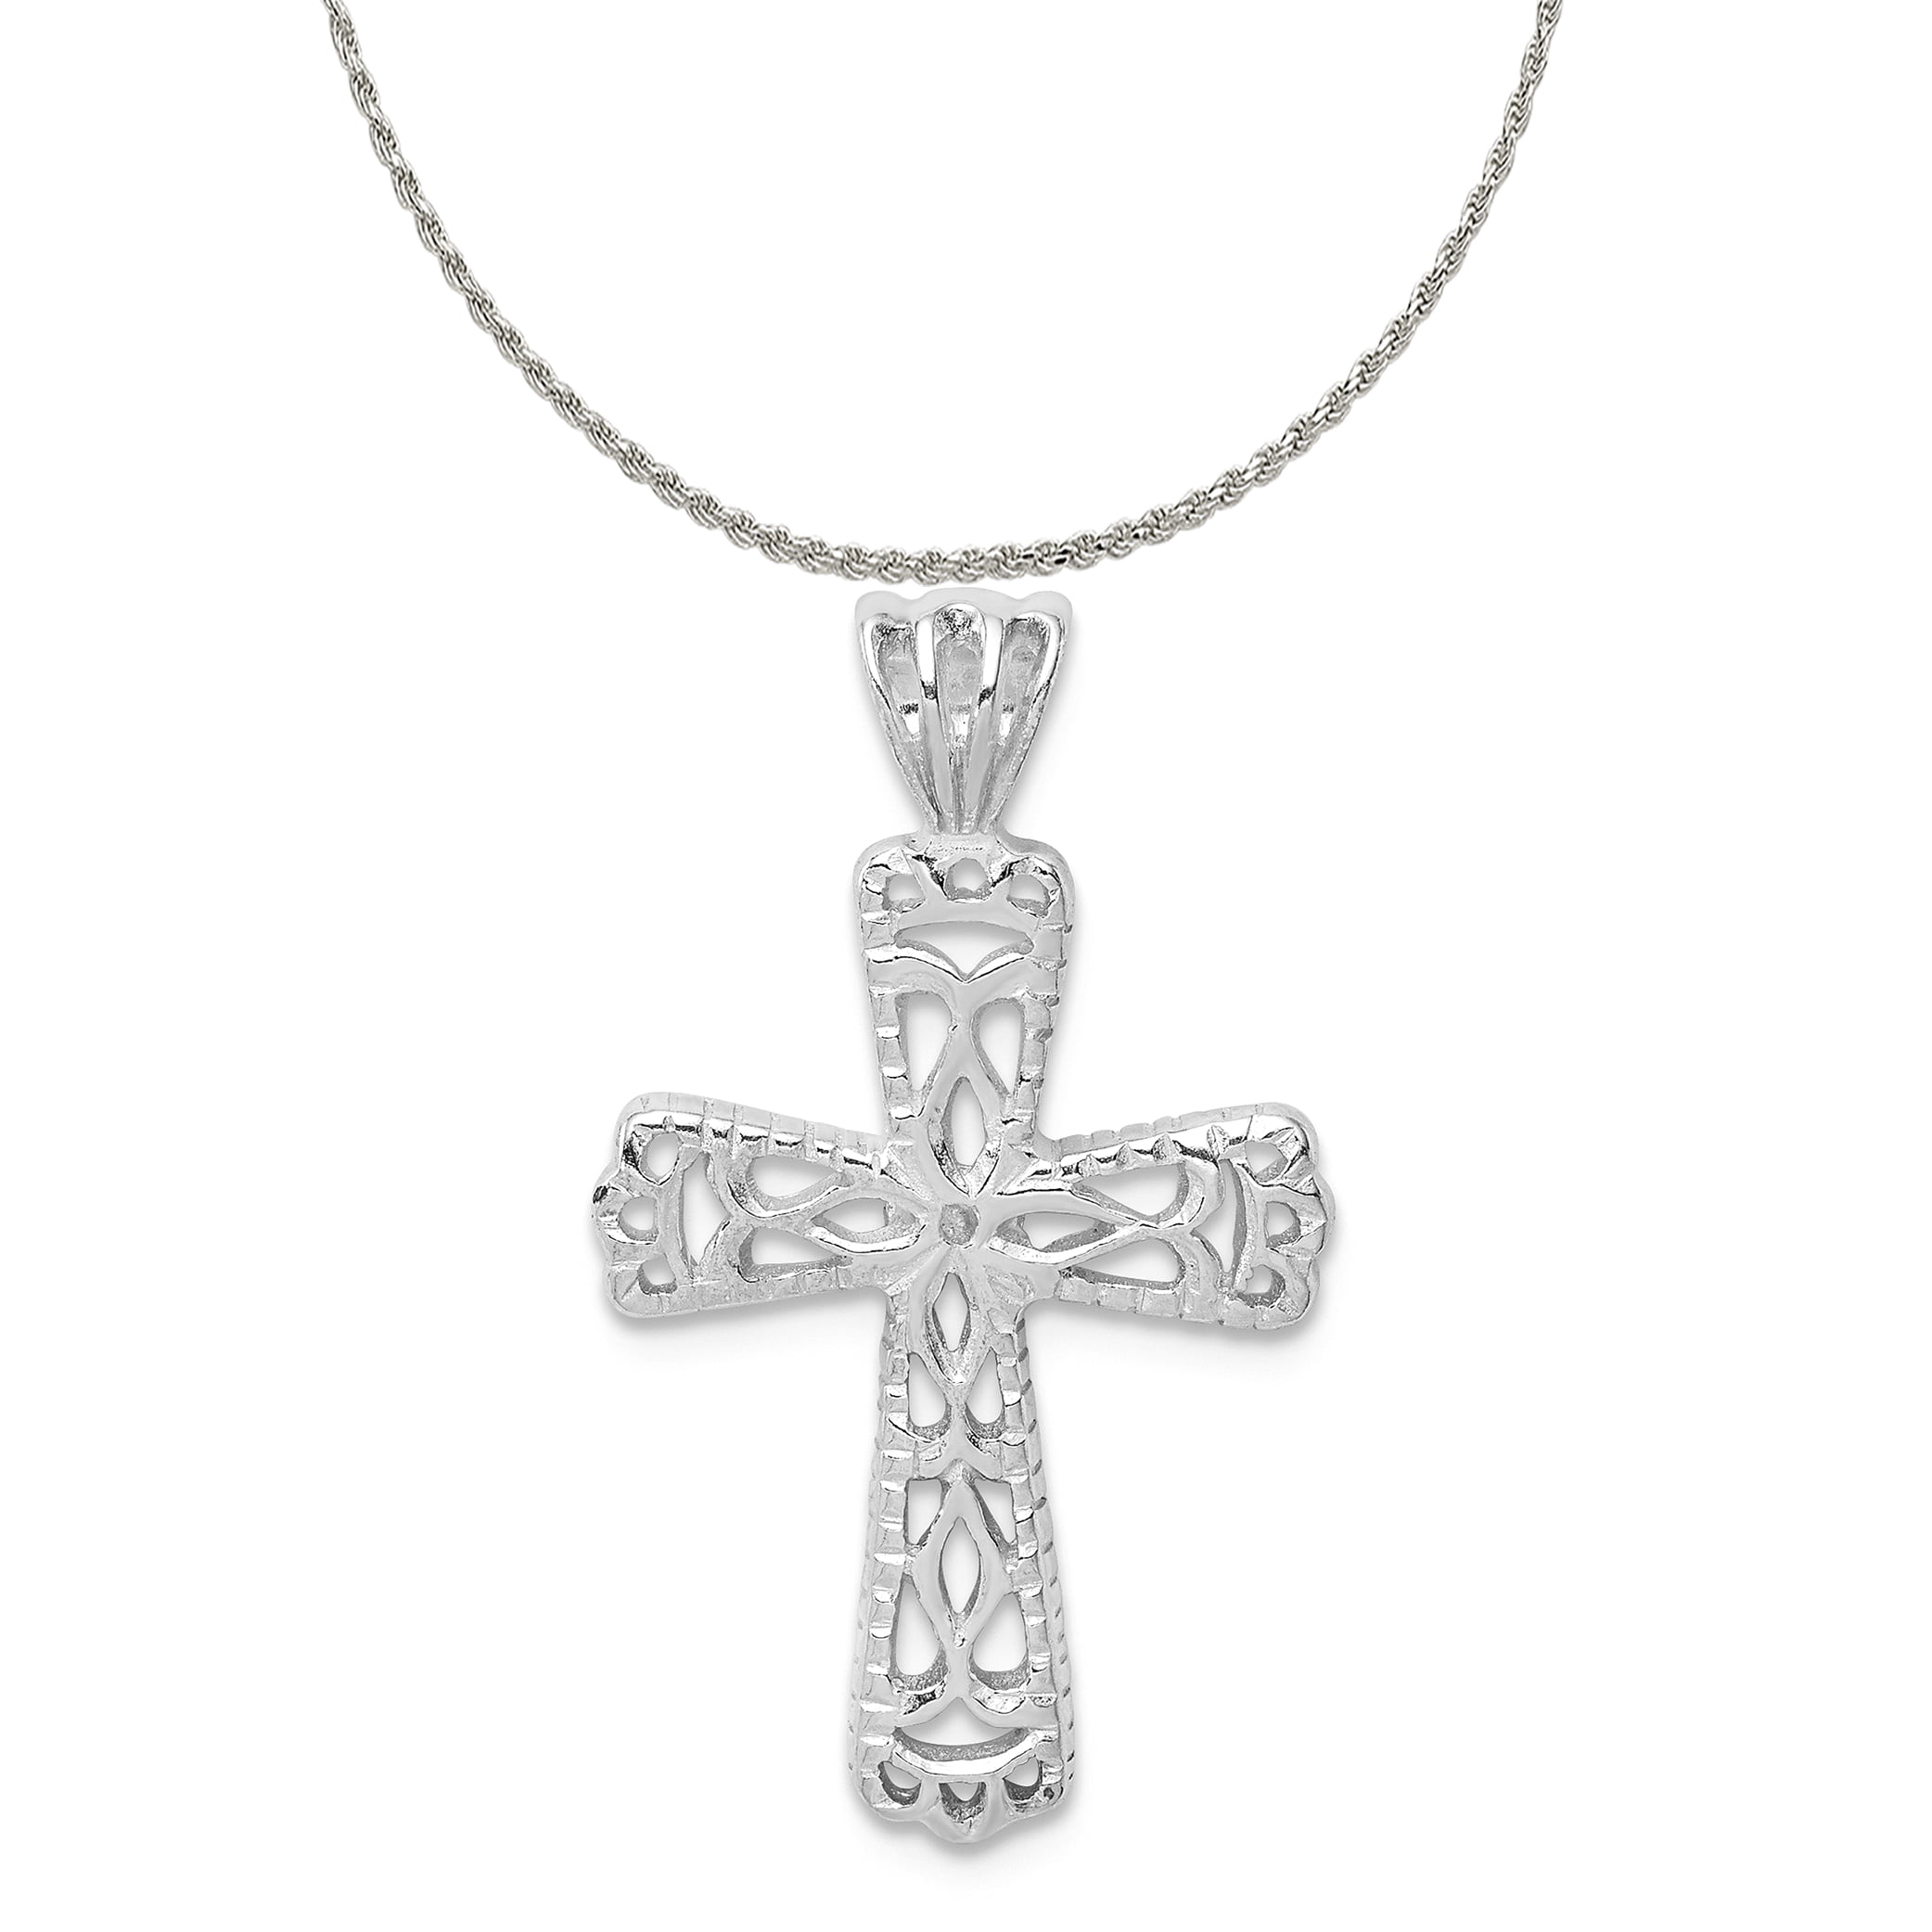 Rhodium-plated 925 Silver Budded Cross Pendant with 18 Necklace Jewels Obsession Silver Cross Necklace